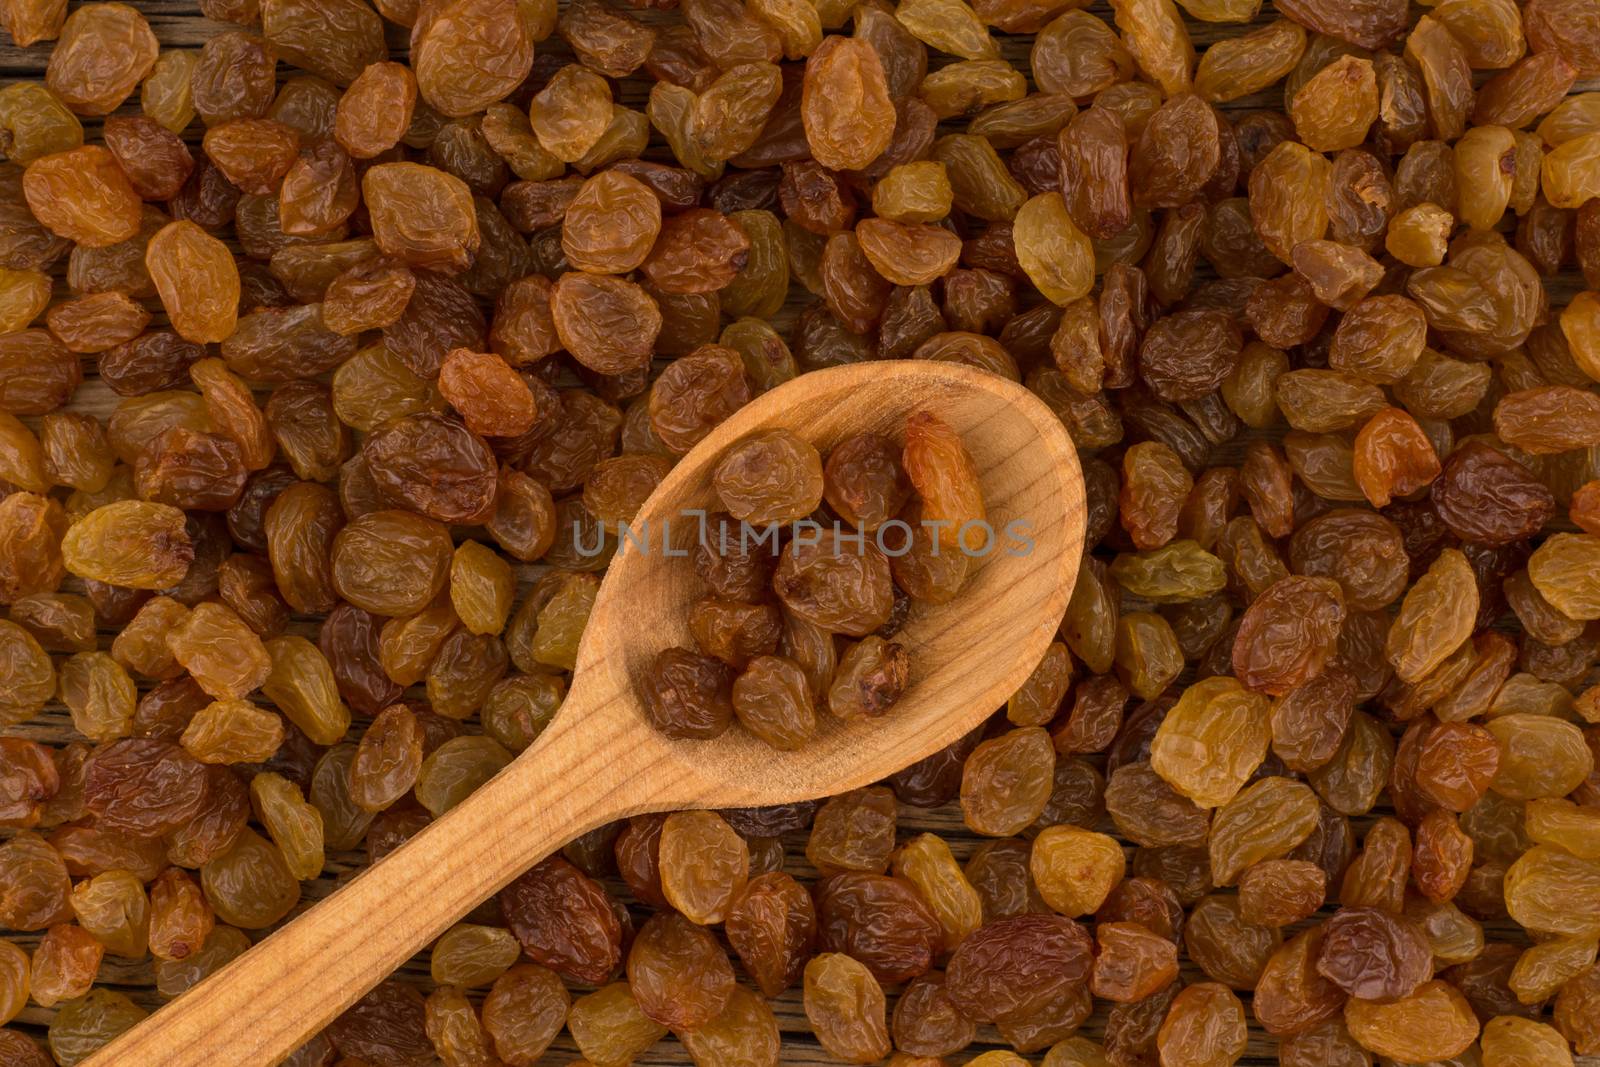 Raisins in wooden spoon and background of raisins. by DGolbay